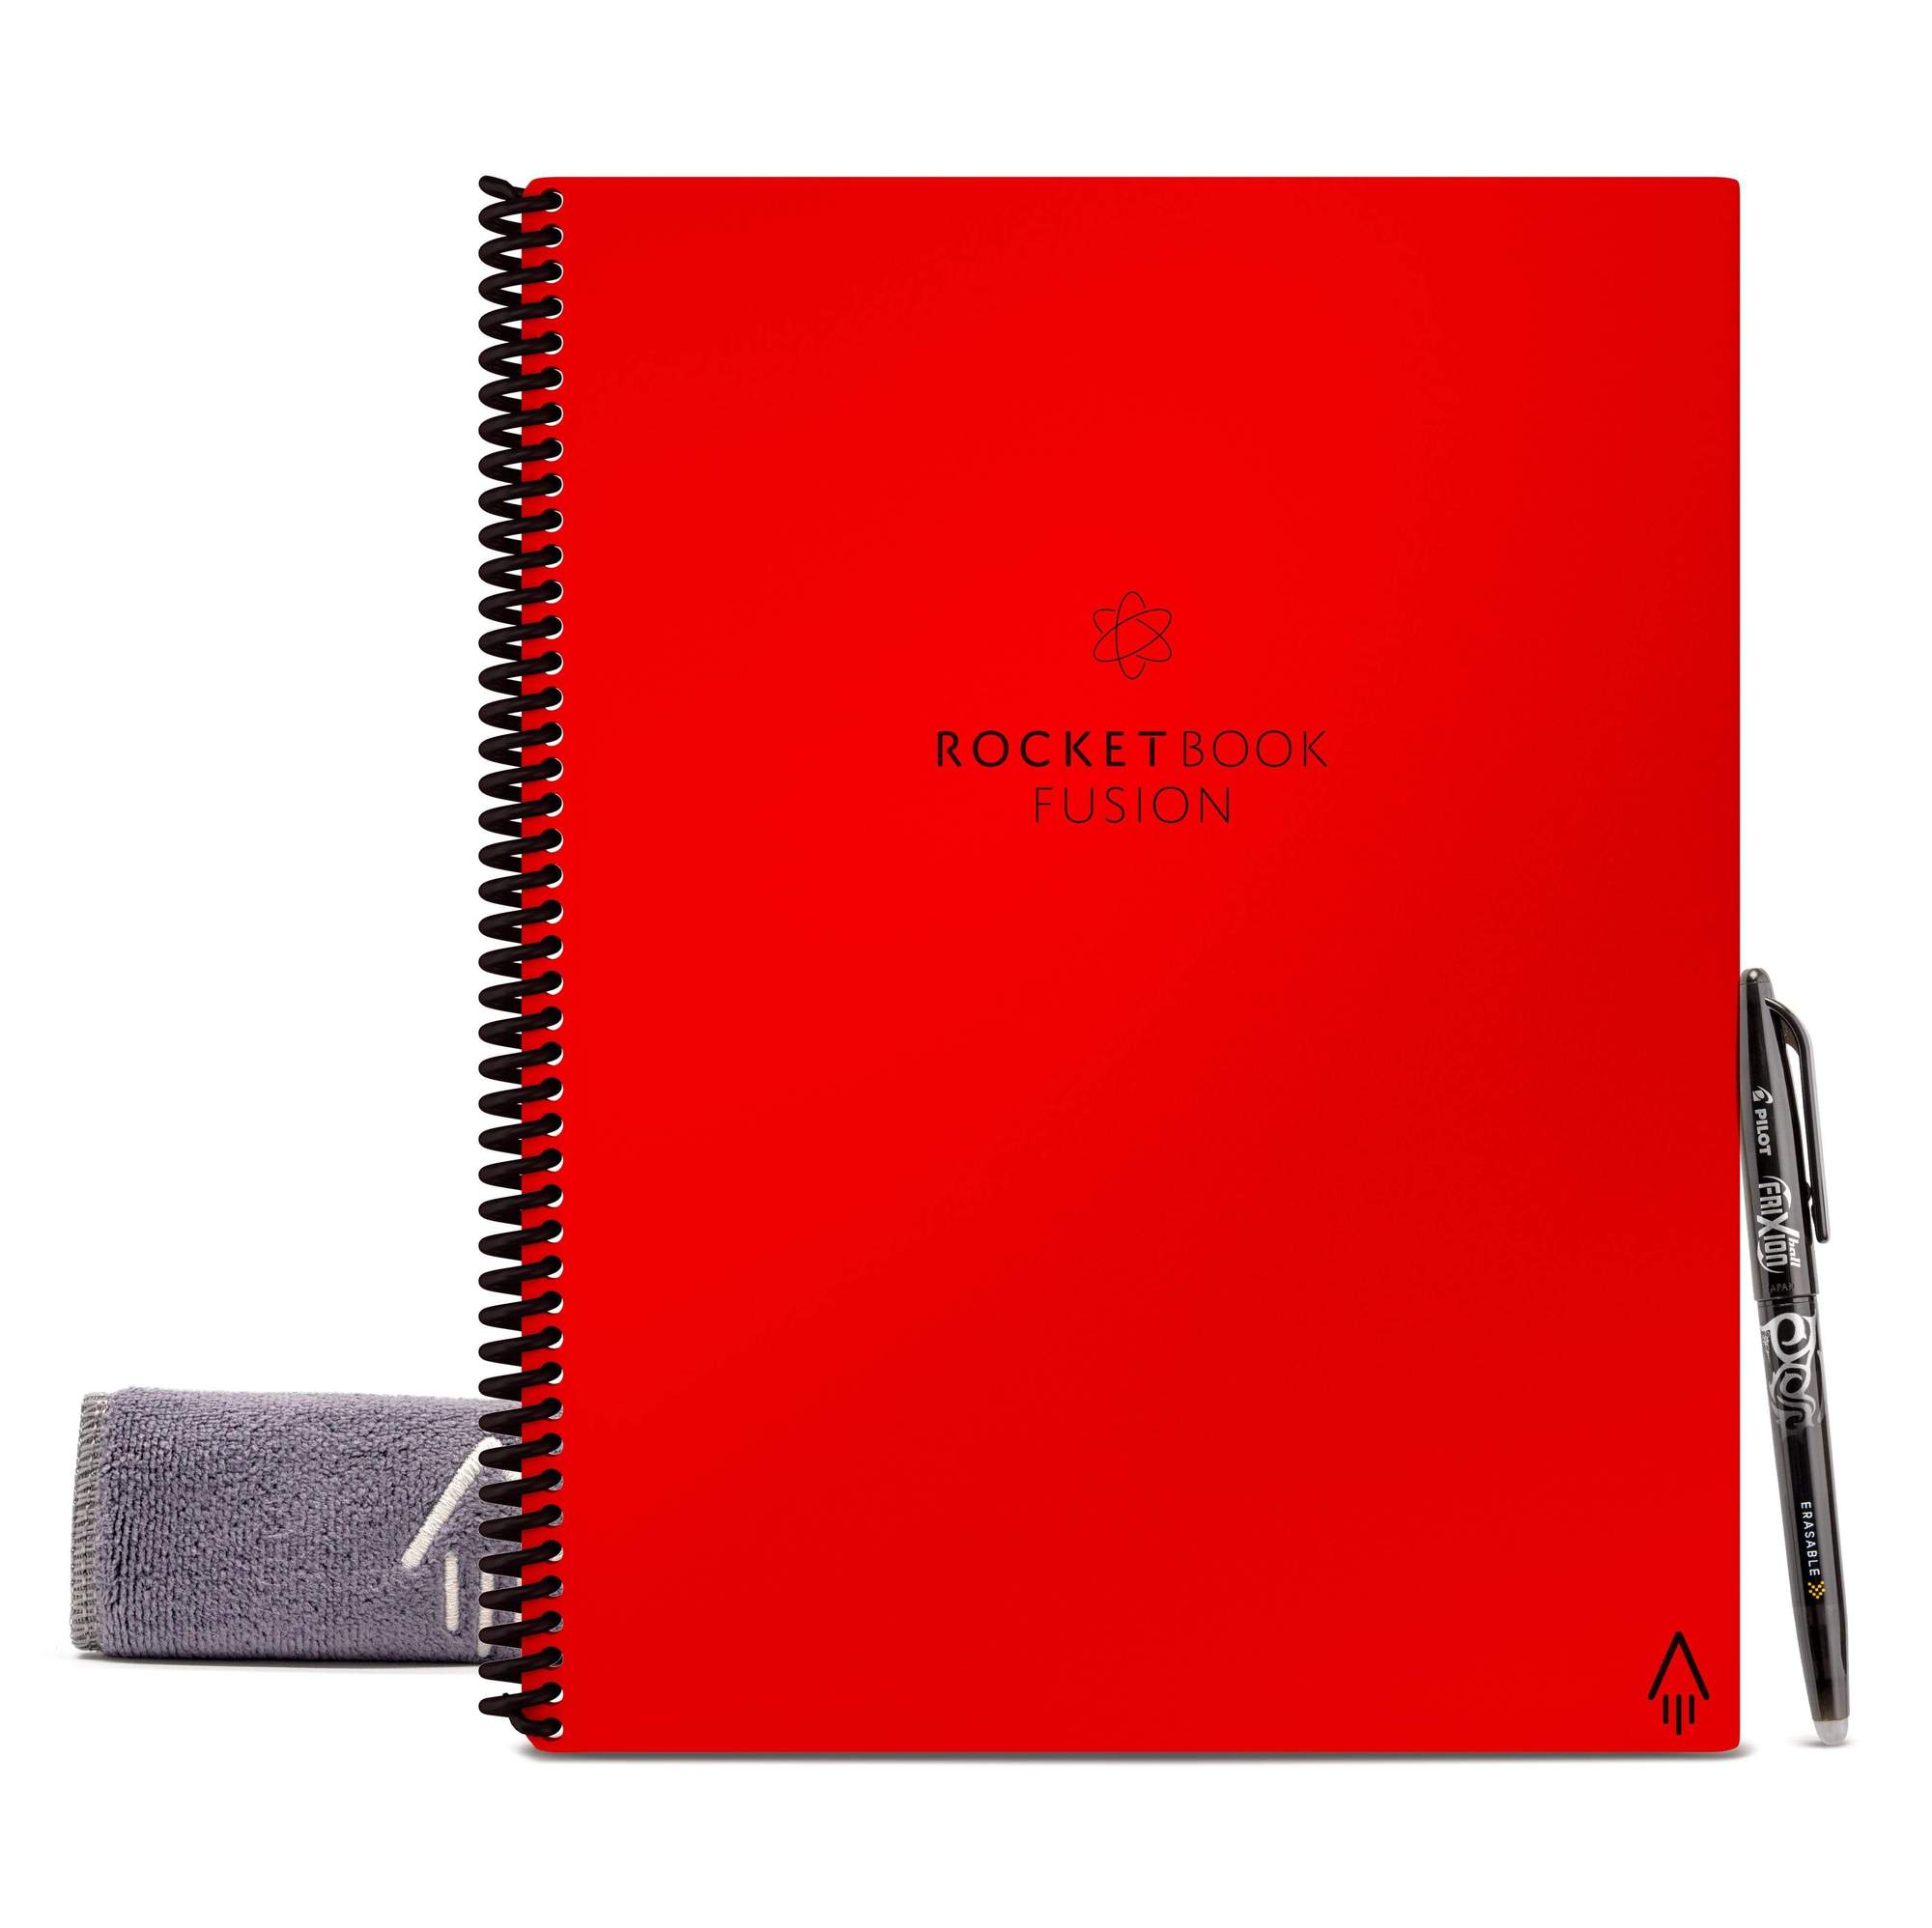 Rocketbook EVRF-L-K Fusion Smart Reusable Notebook with Pen and Microfiber Cloth, Letter Size